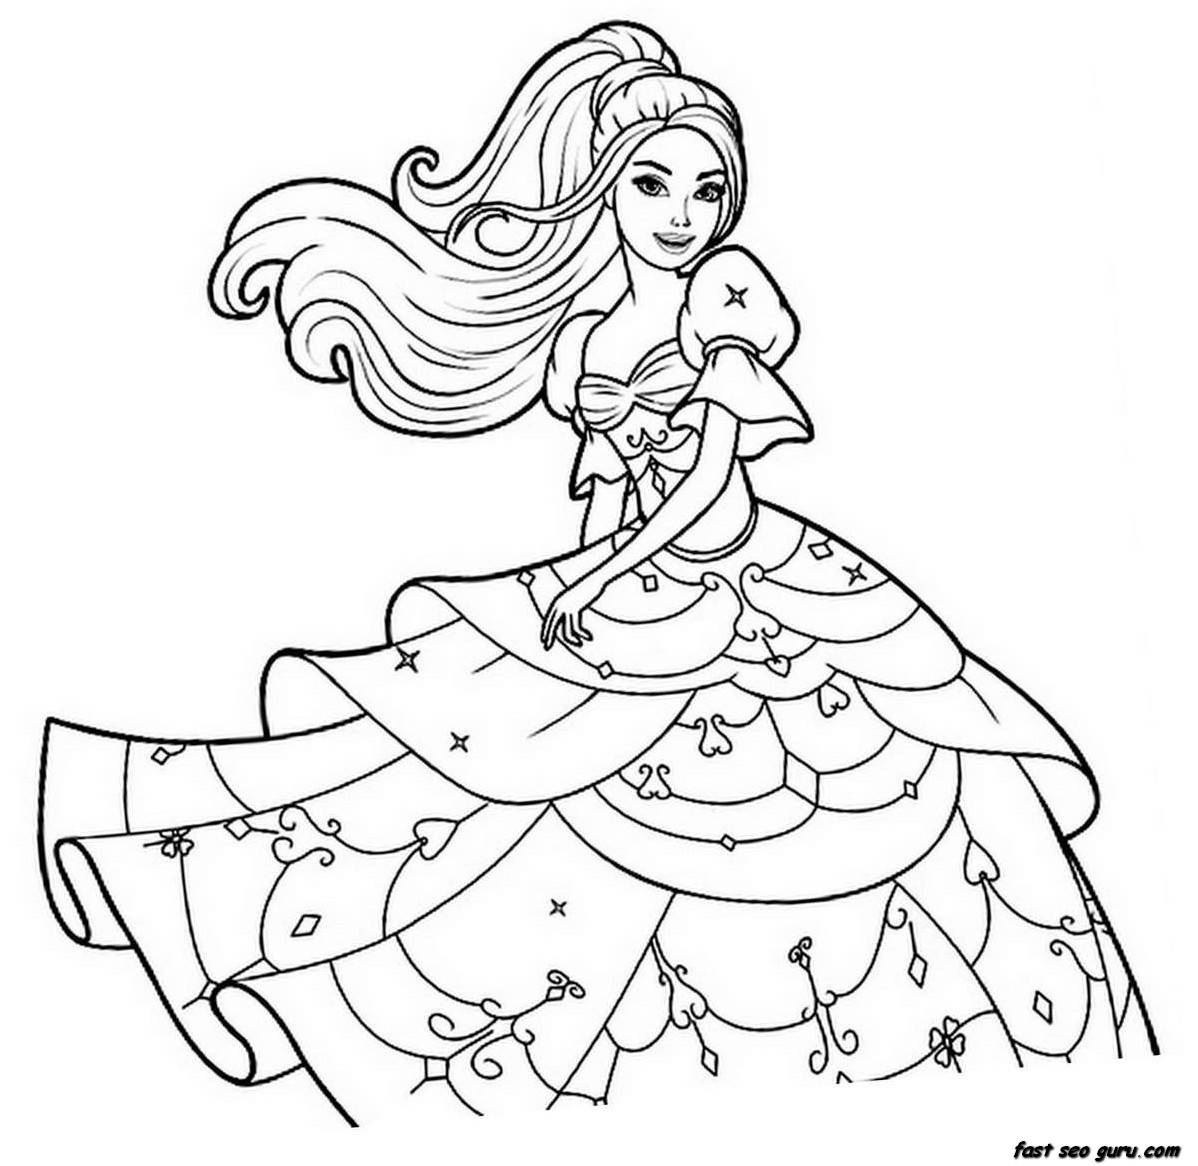 Cute Girl Coloring Pages Cute Girl Coloring Pages To Download And Print For Free